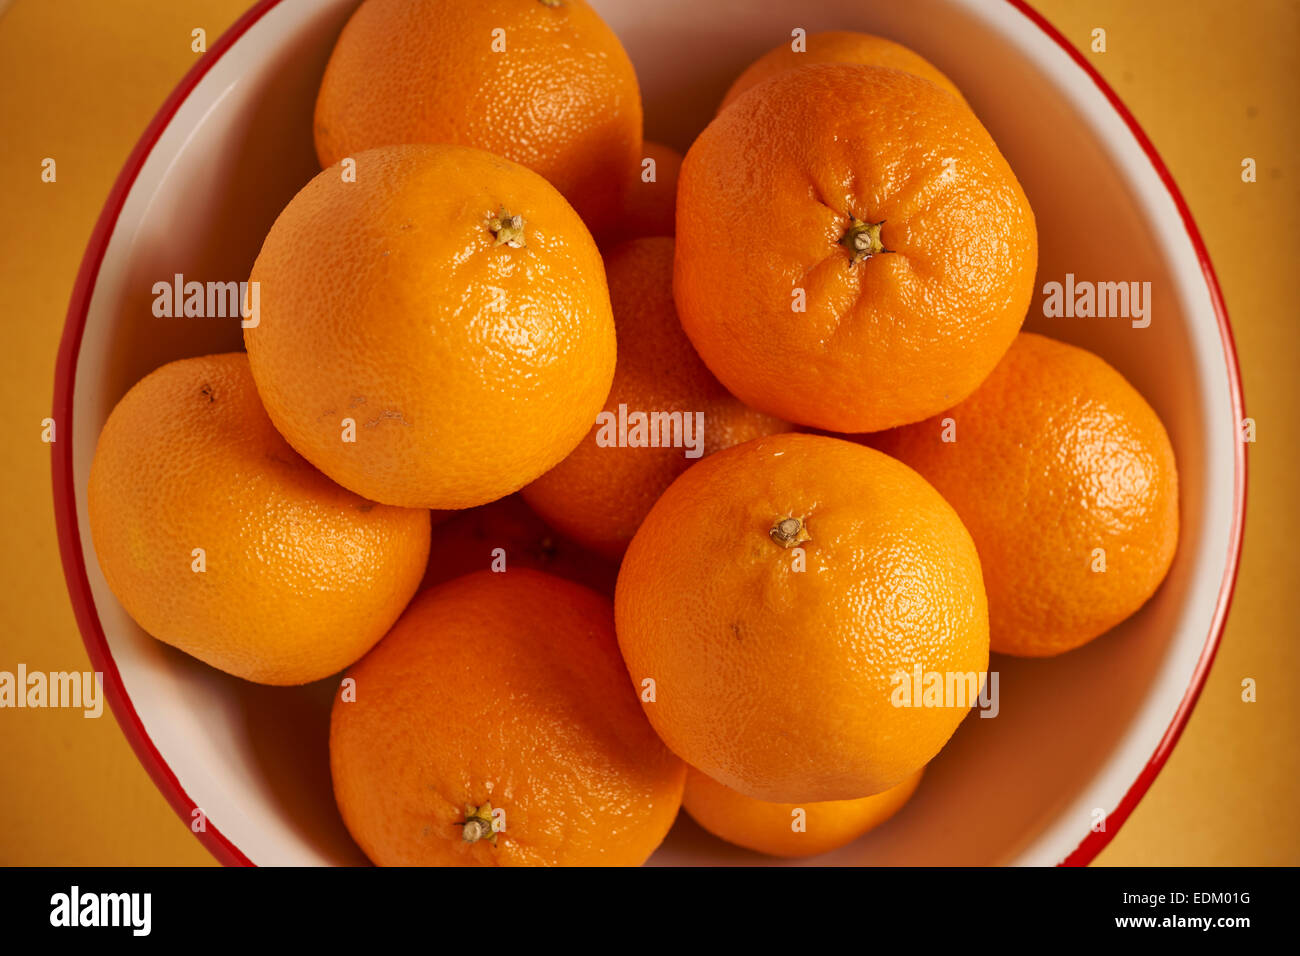 Whole, unpeeled Clementines Stock Photo